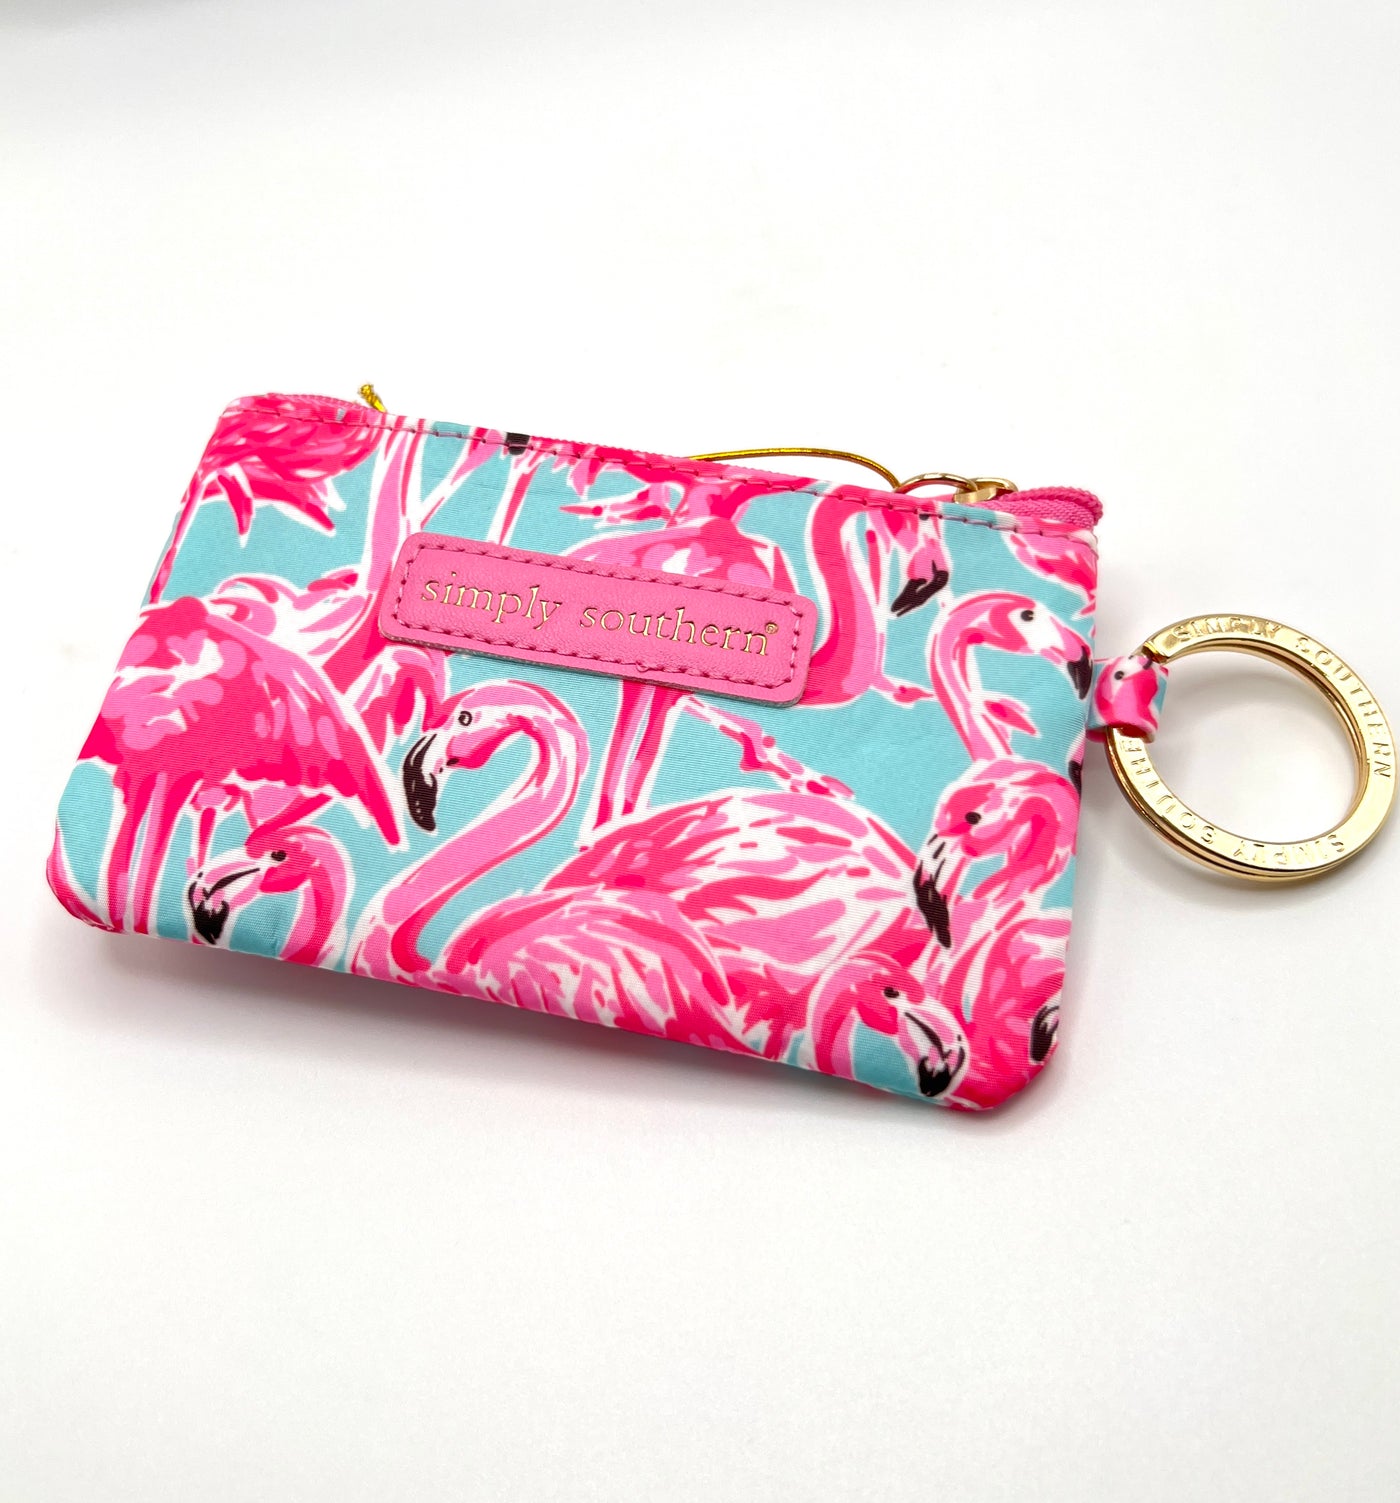 Simply Southern® Trifold Wallet - Pink – Heidisonline